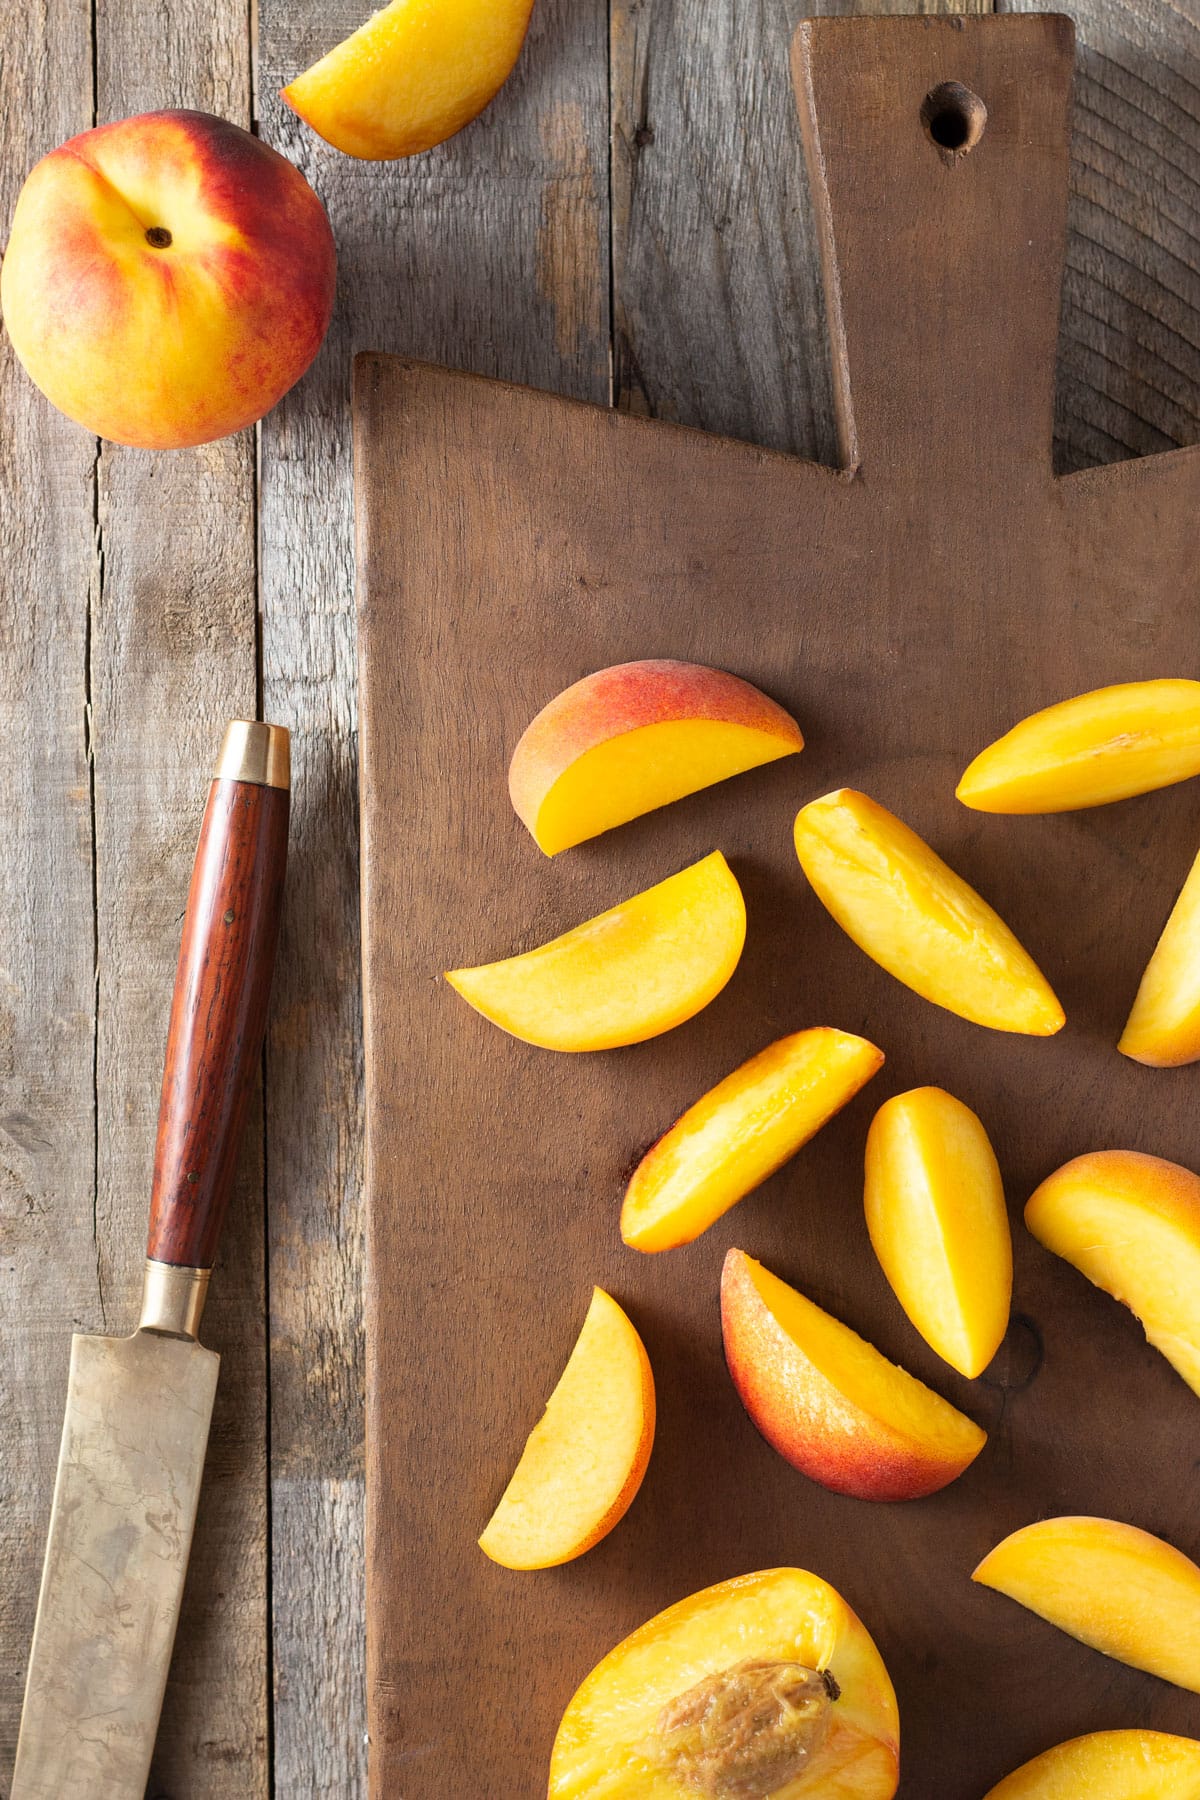 Sliced Peaches on a wood cutting board next to a whole peach and a knife.